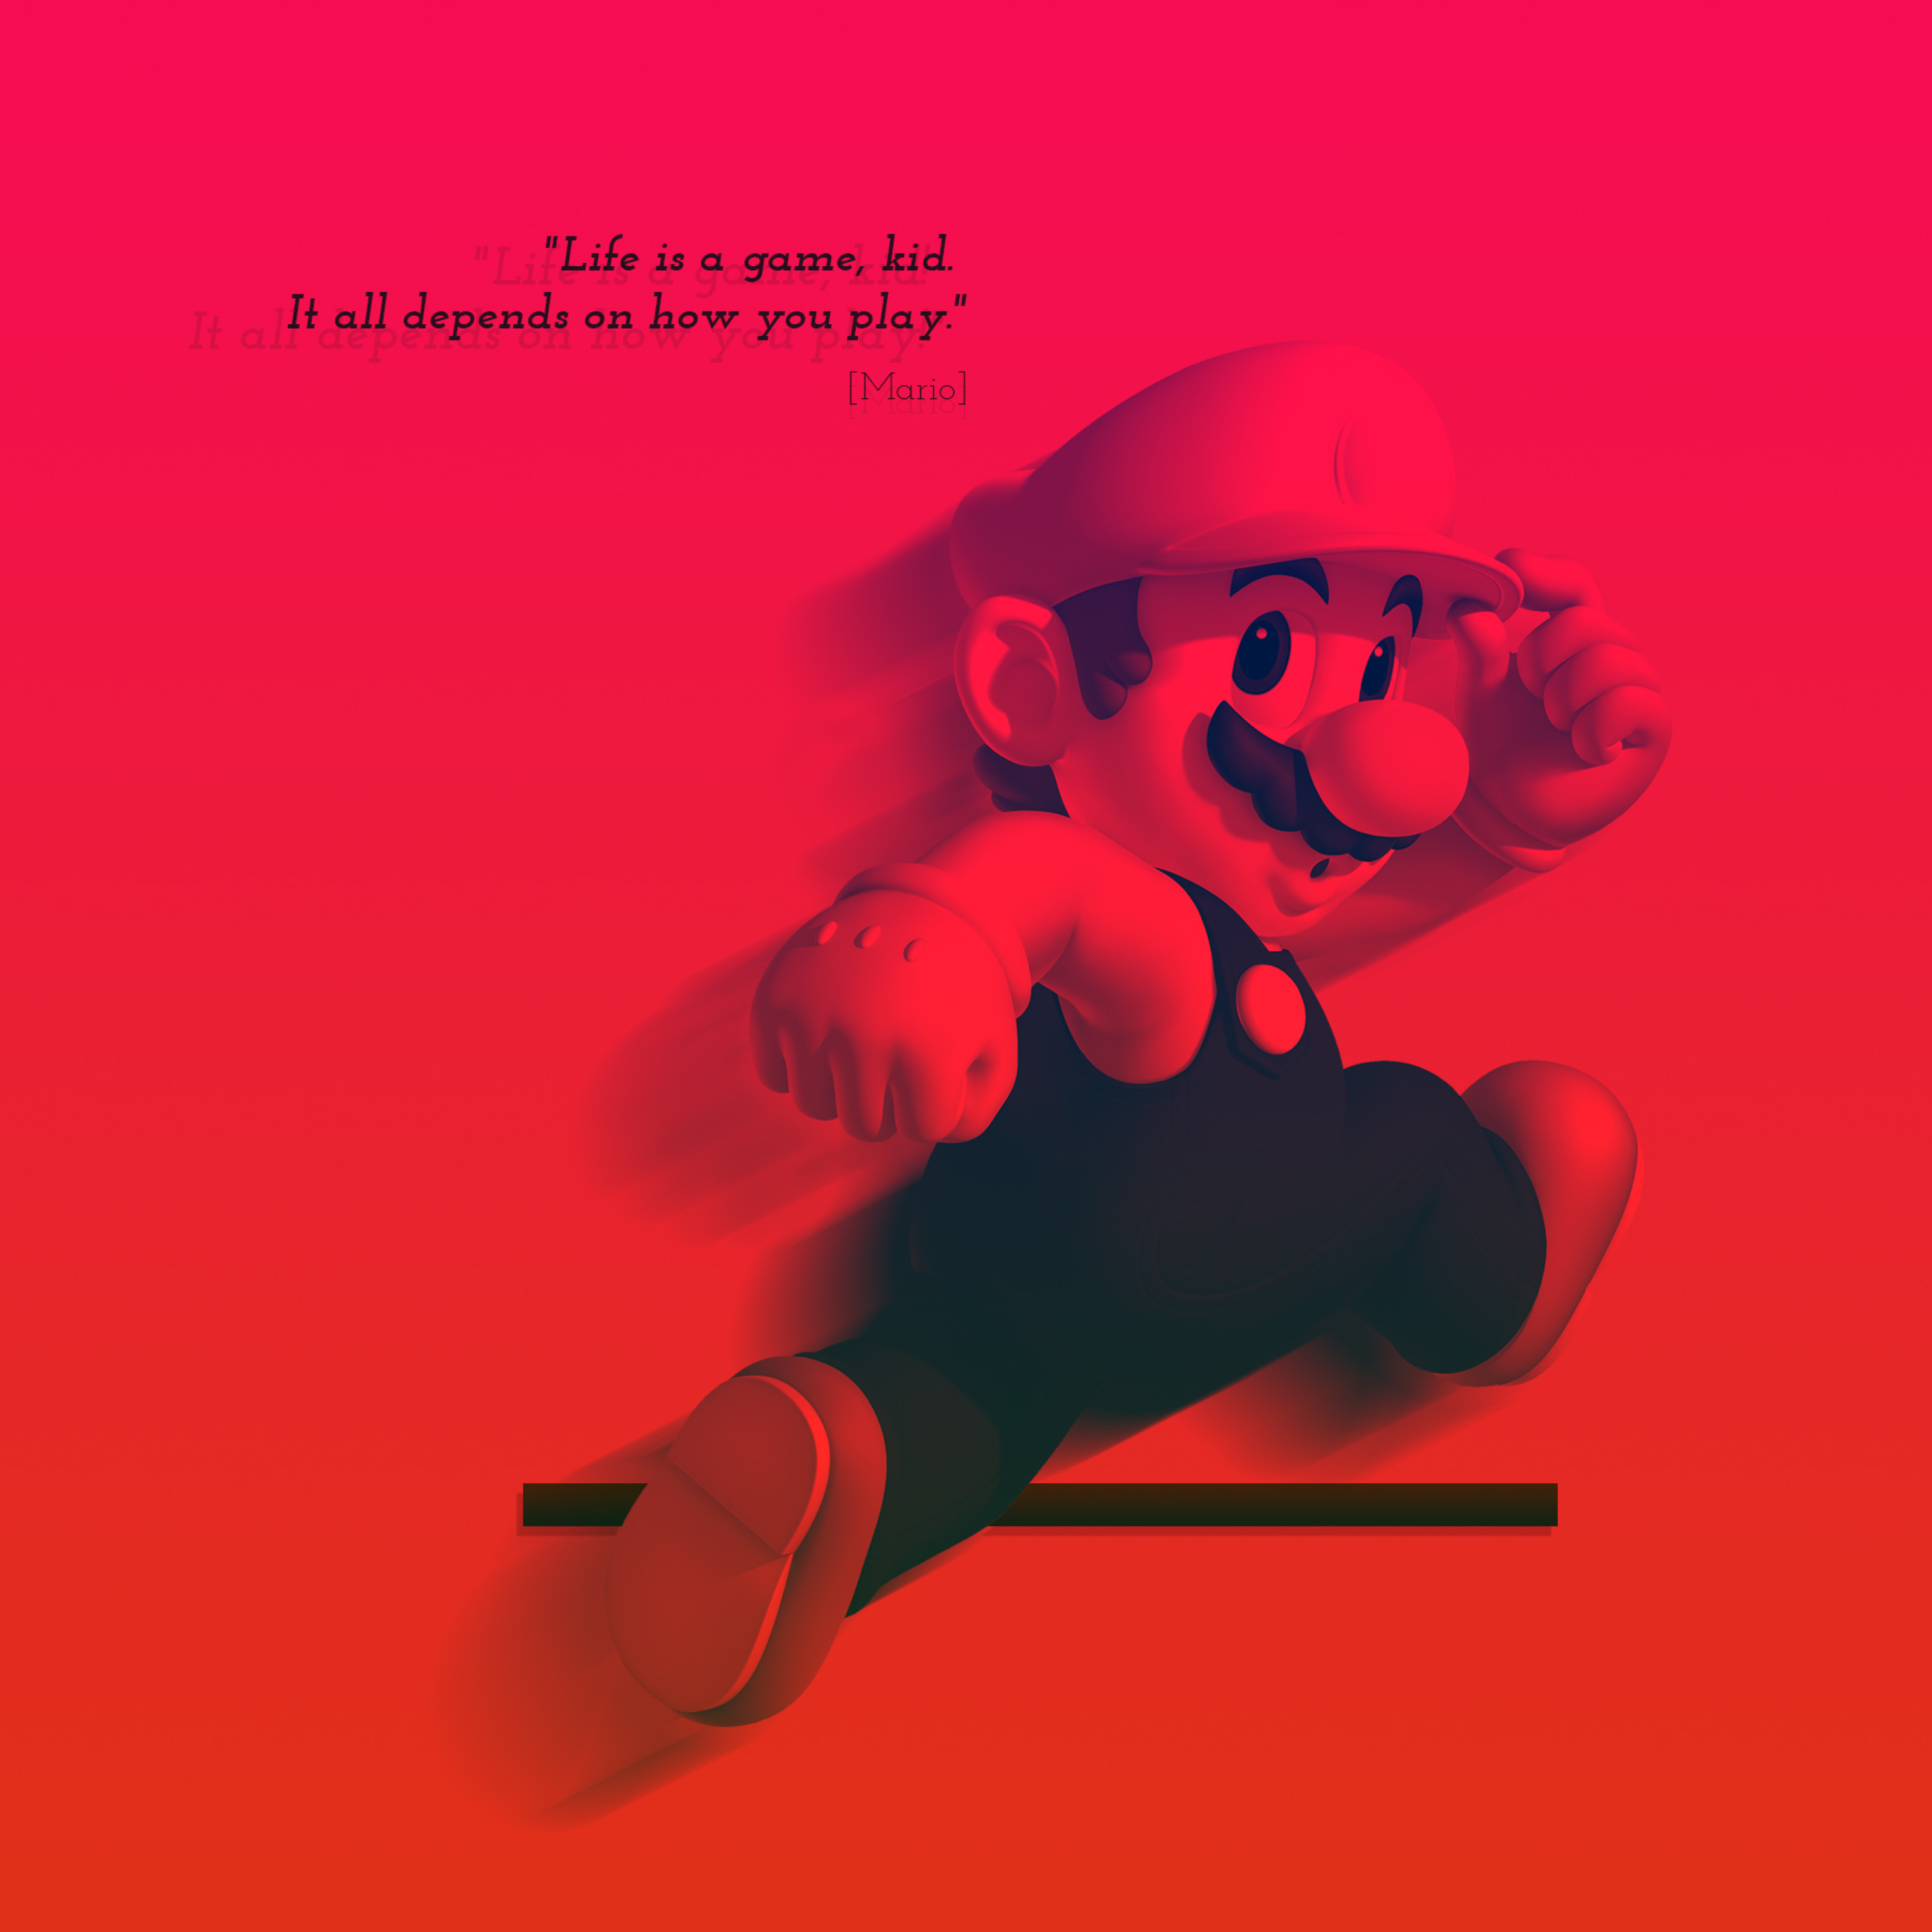 Life Is A Game Mario Quote, Full HD 2K Wallpaper